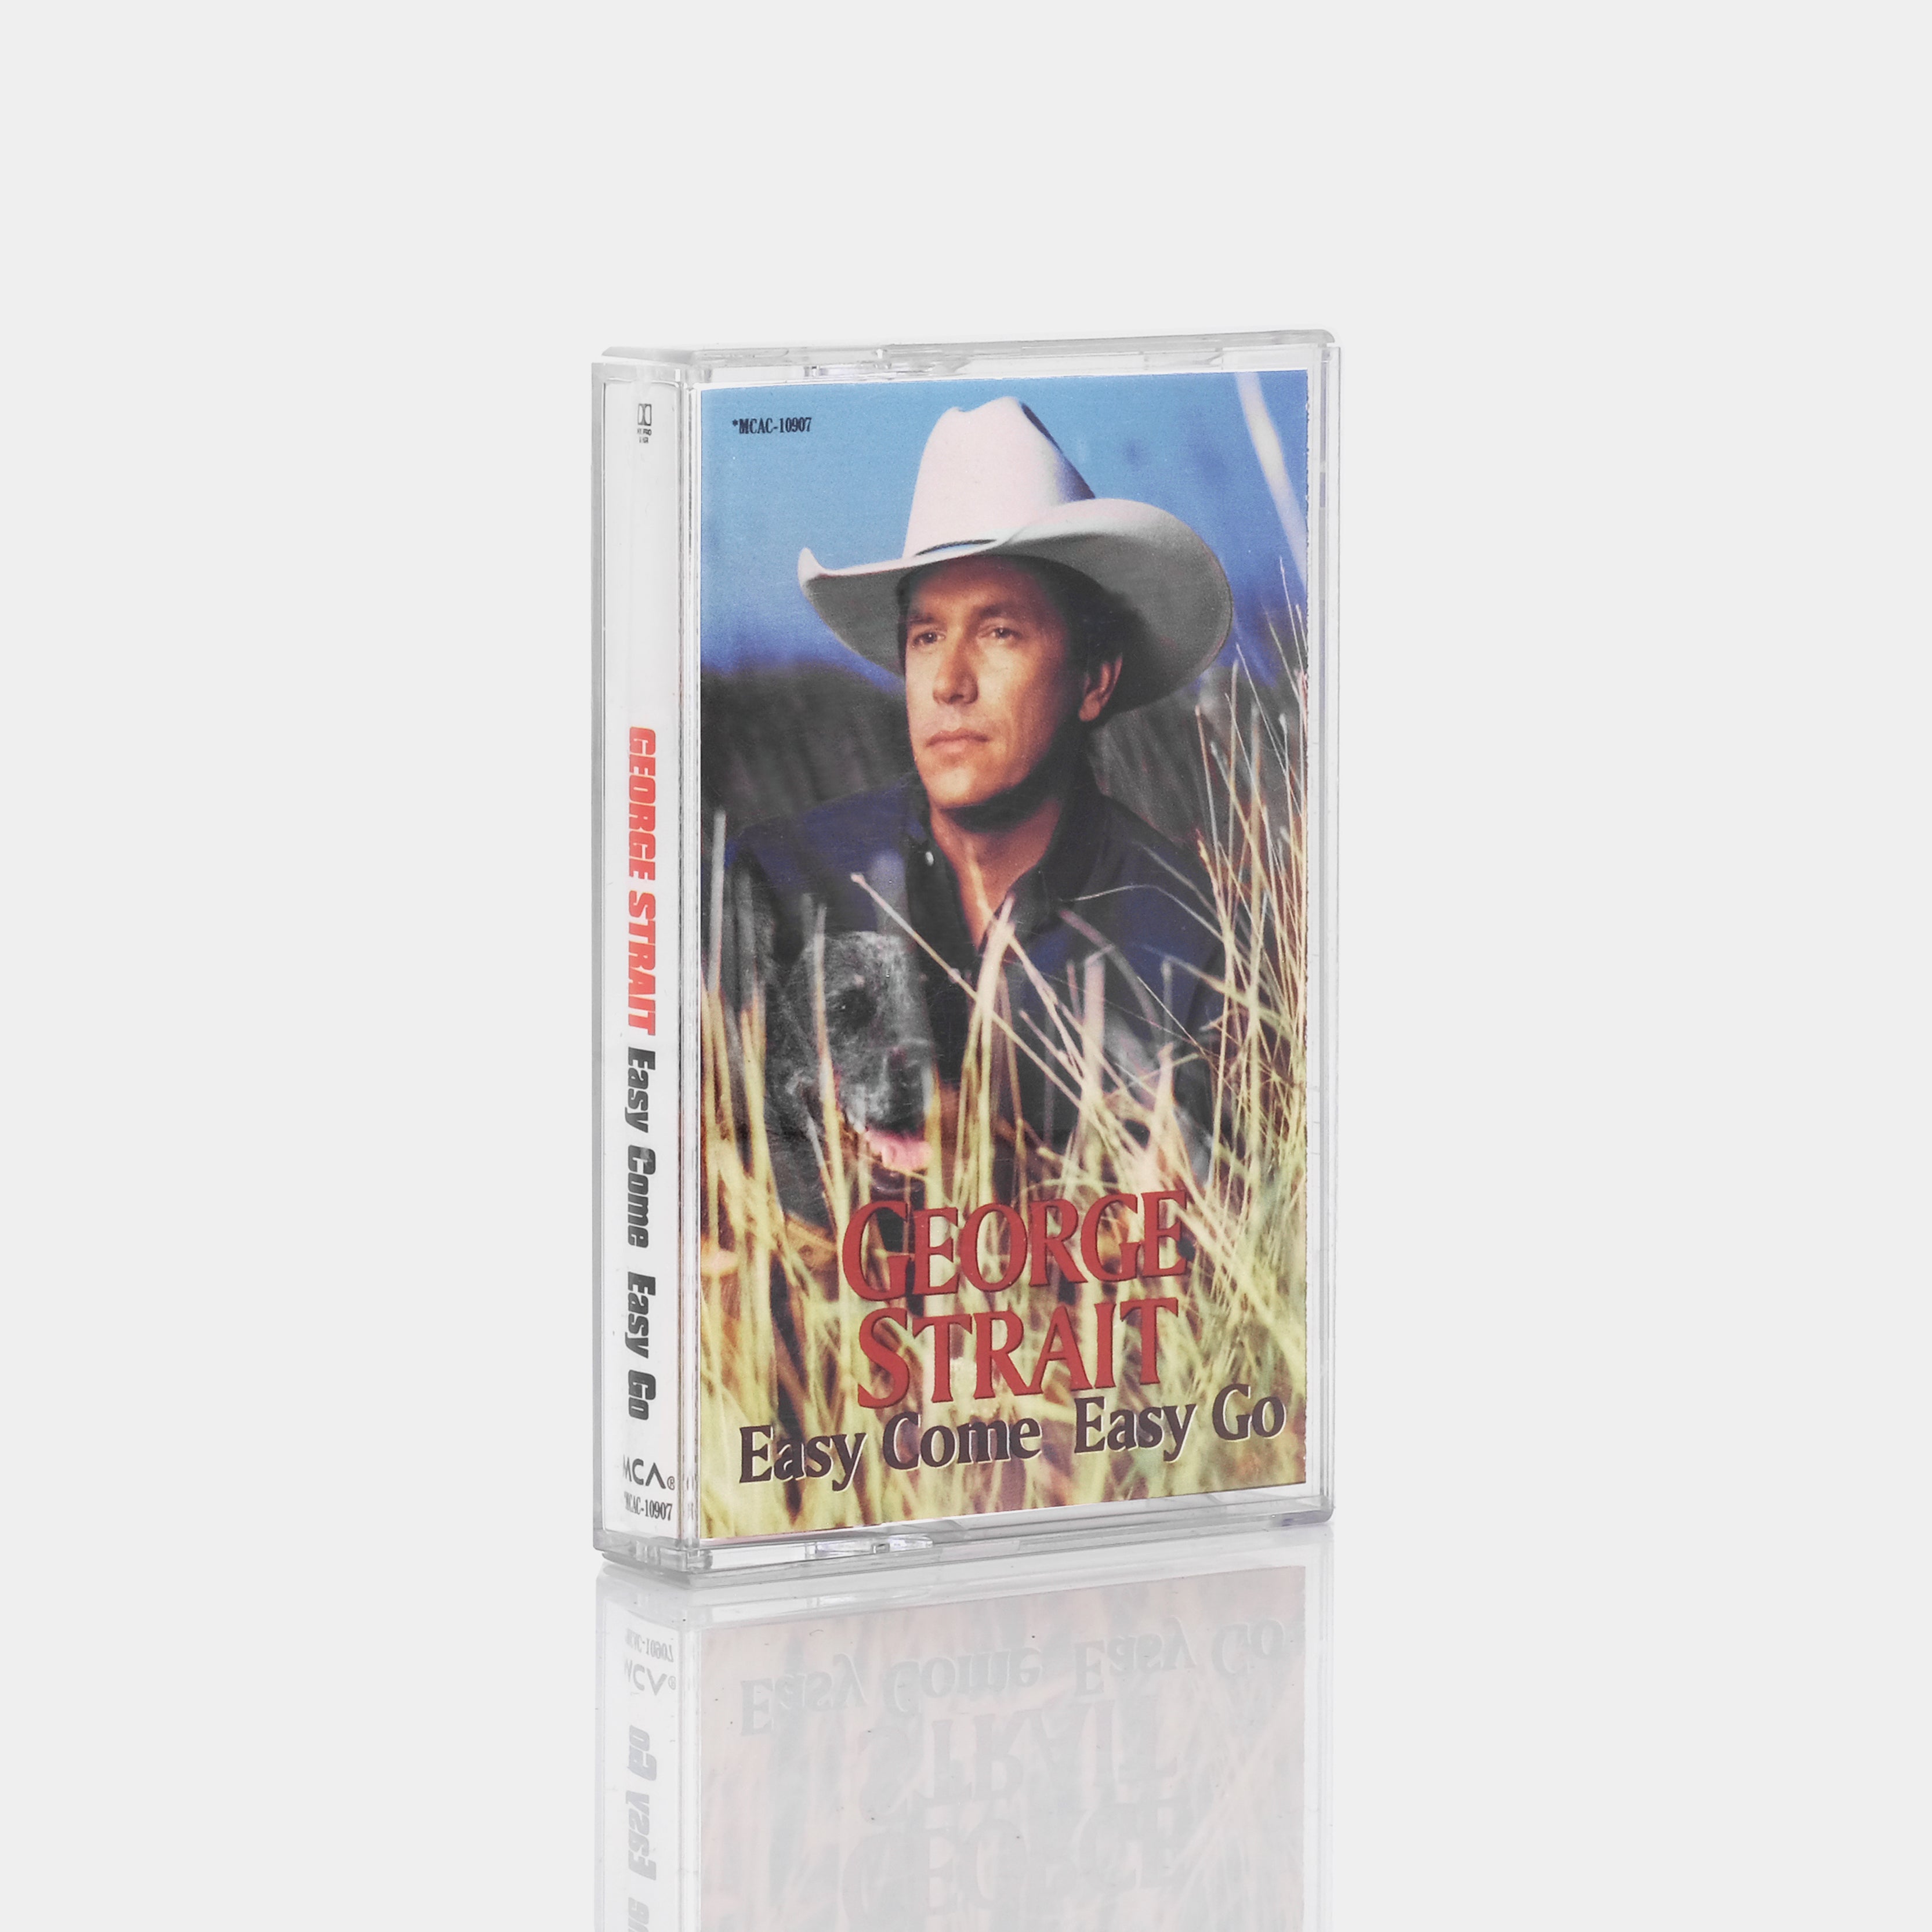 George Strait - Easy Come Easy Go Cassette Tape